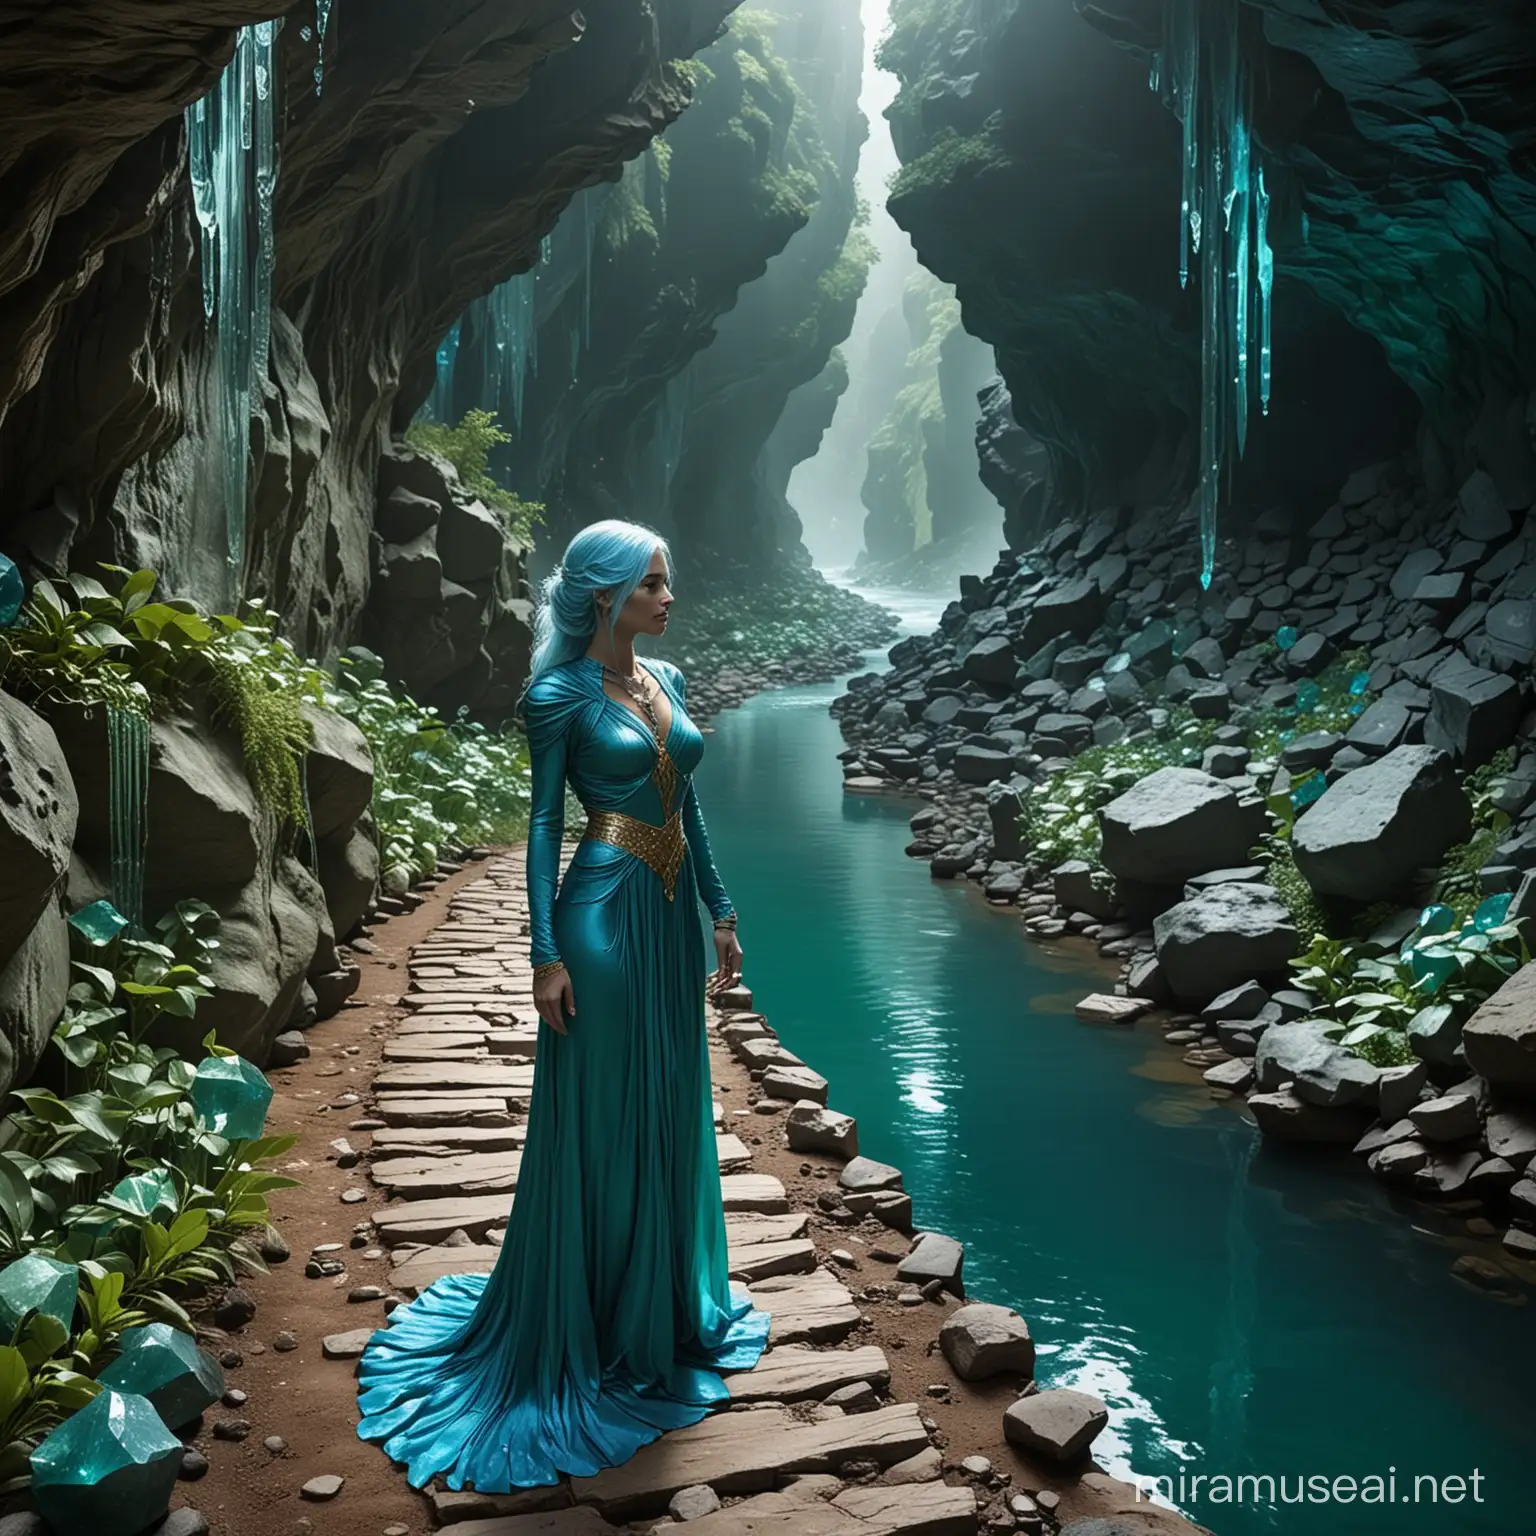 An elegantly dressed, blue-skinned woman on a path in the depths of Greed Cave, a mystical world with green crystal walls.  A river runs through it.  You can mine precious ores like rubies, gold, and platinum here.